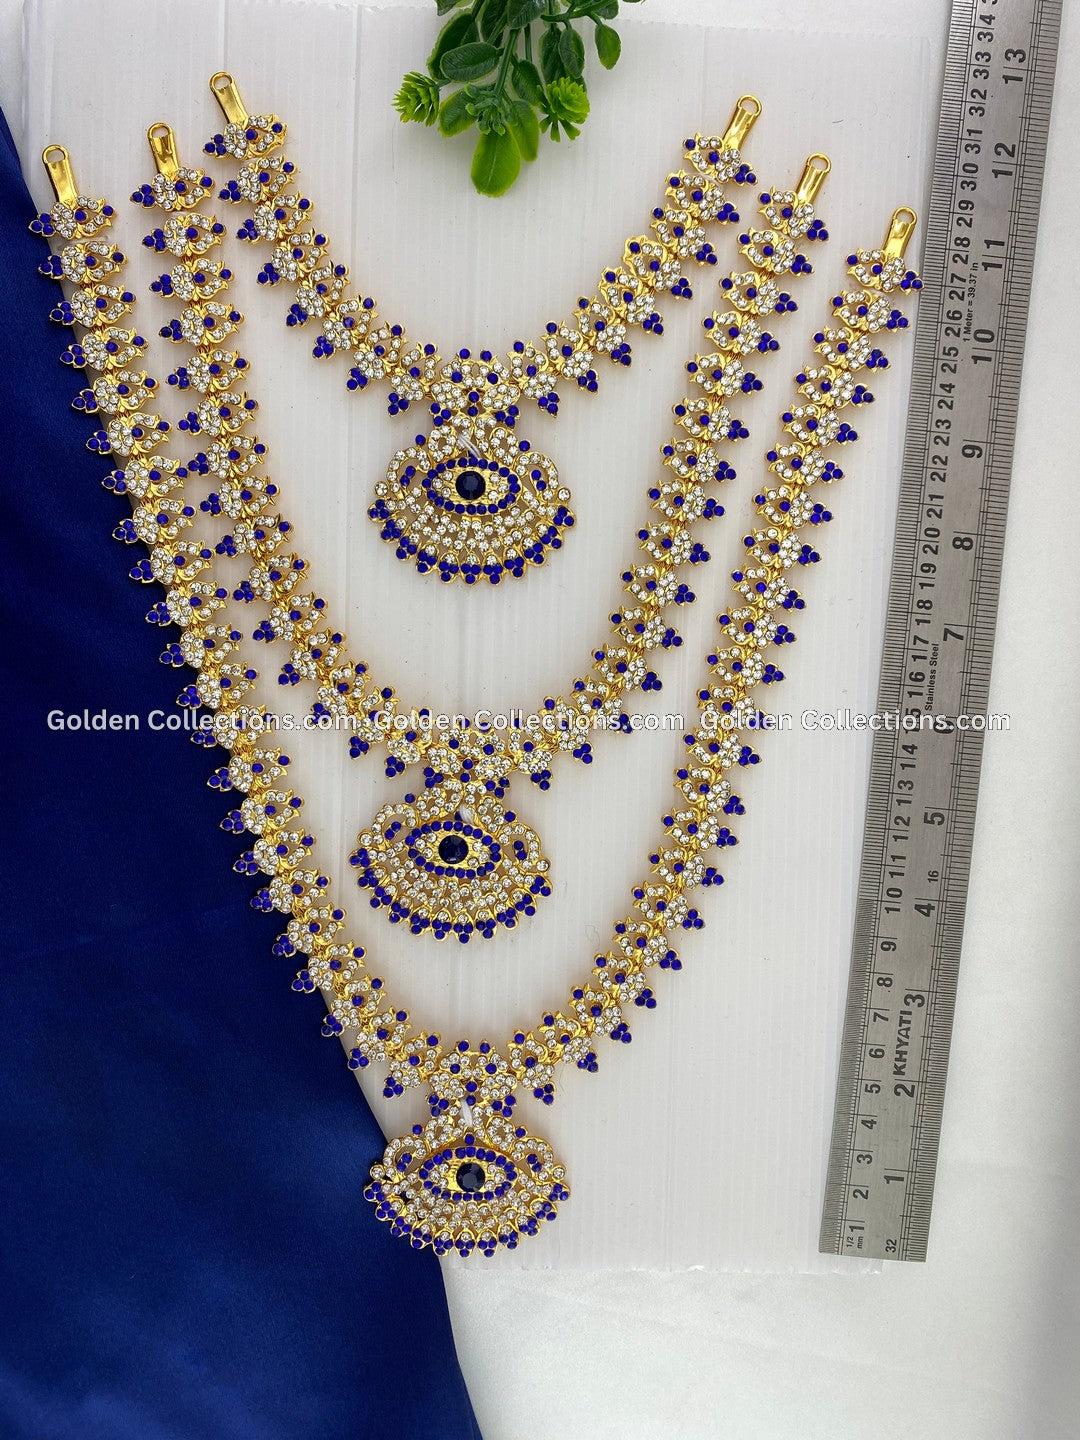 Amman Temple Jewellery Collection - GoldenCollections DLN-019 2